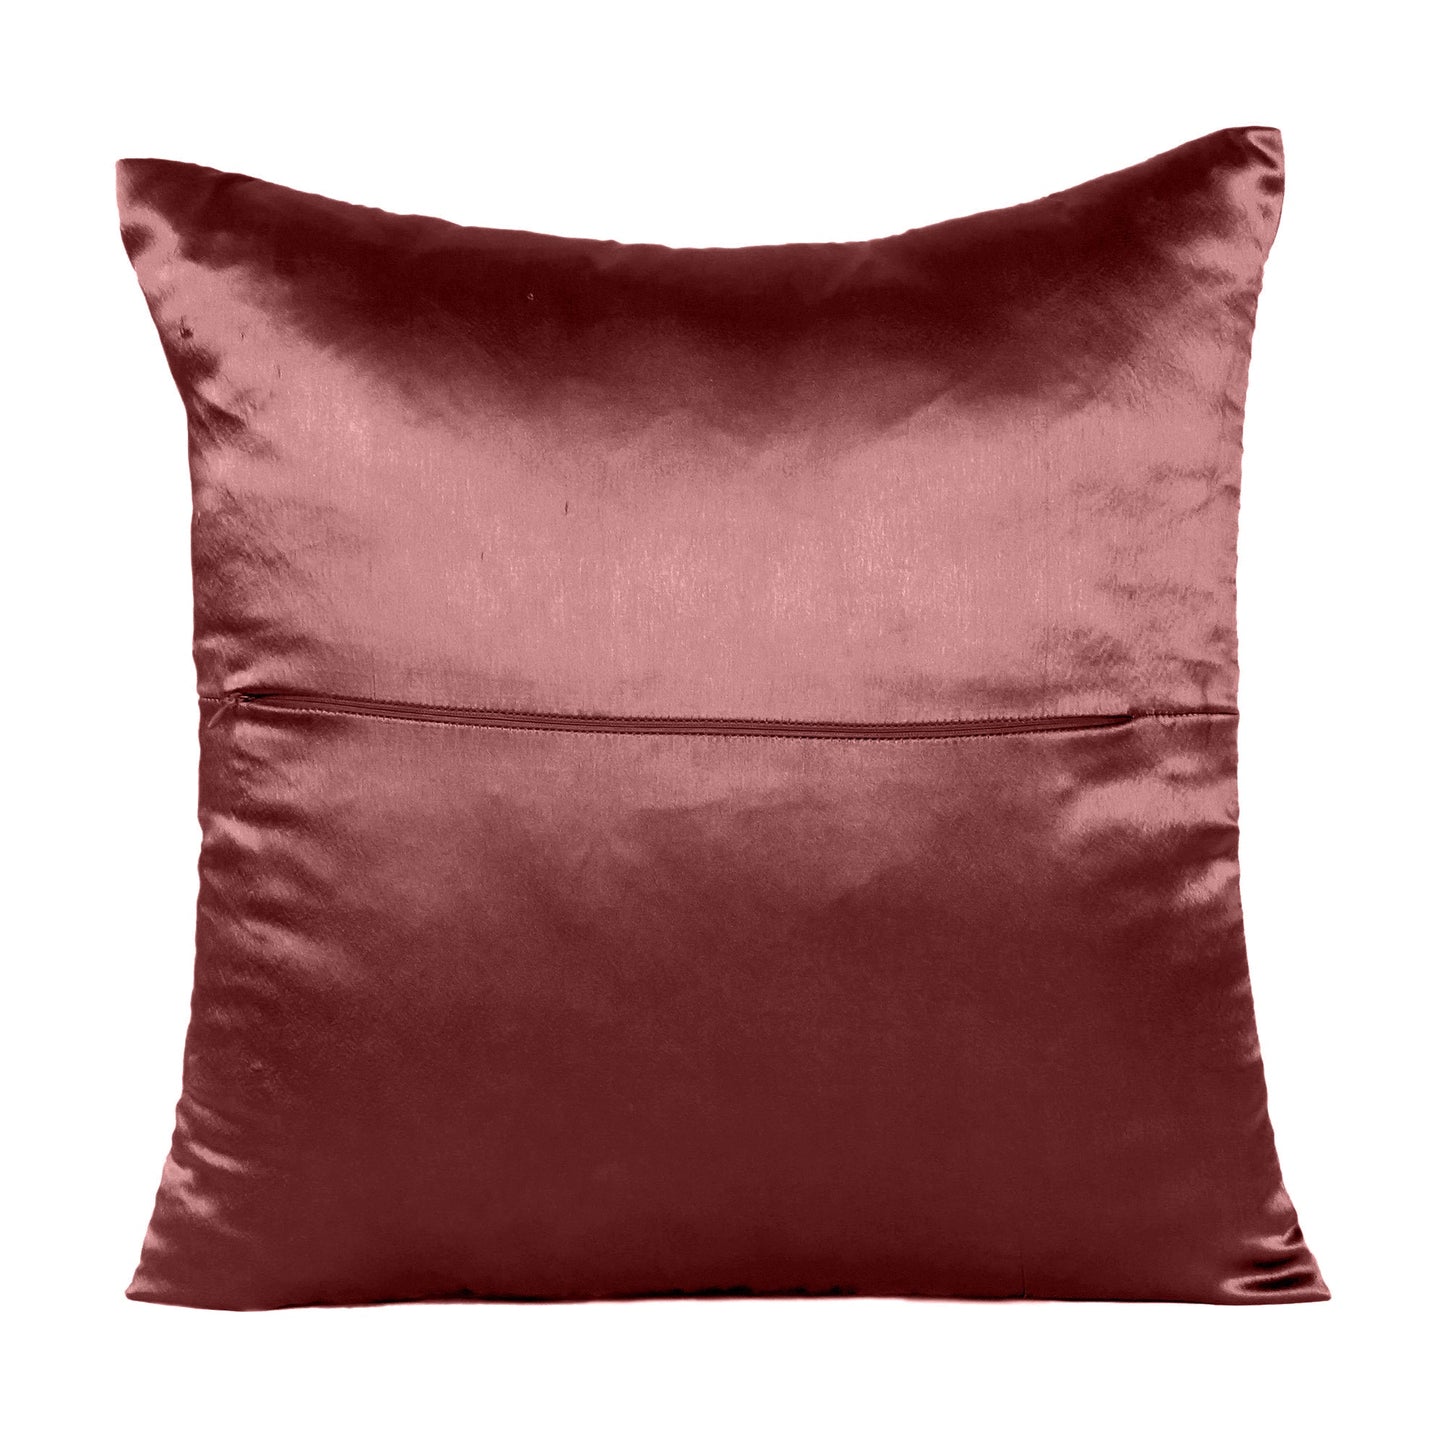 Luxury Soft Plain Satin Silk Cushion Cover in Set of 2 - Jester Red